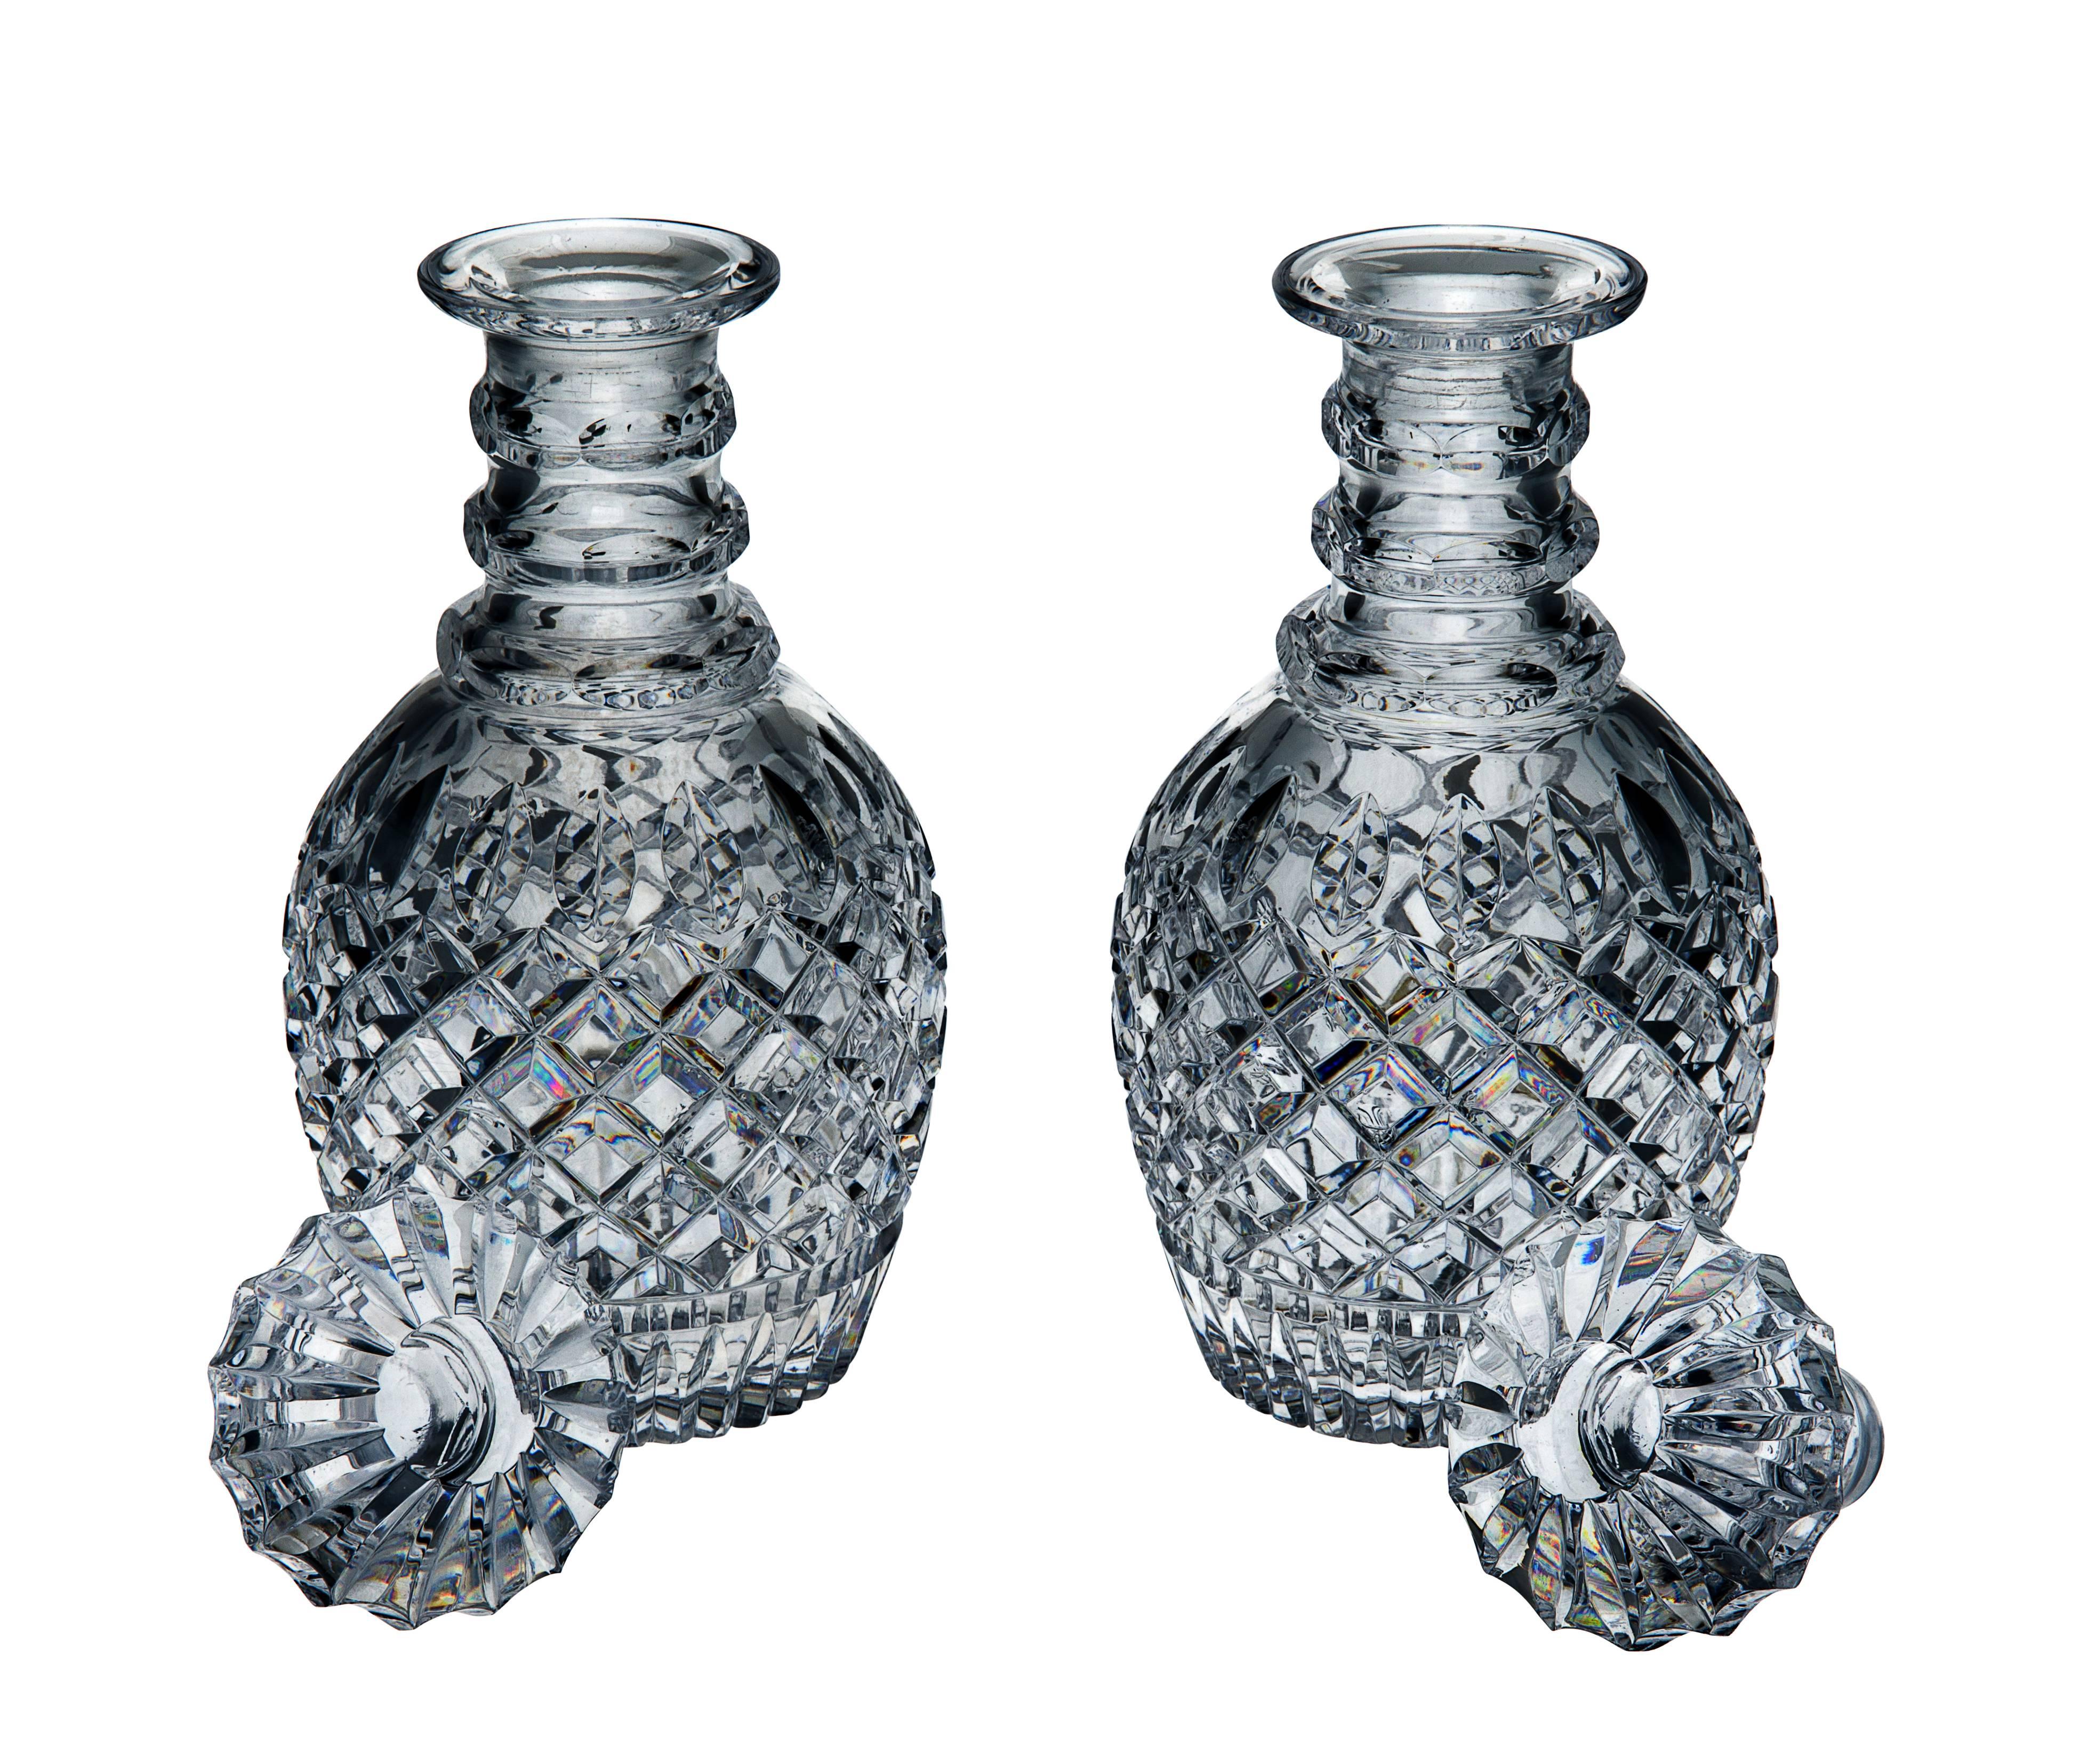 Pair of Victorian glass blown-molded English barrel-shaped spirit decanters and stoppers with three applied cut-facetted rings to neck under everted lip, the bodies cut with punties above a wide band of diamonds above vertical flutes and star cut